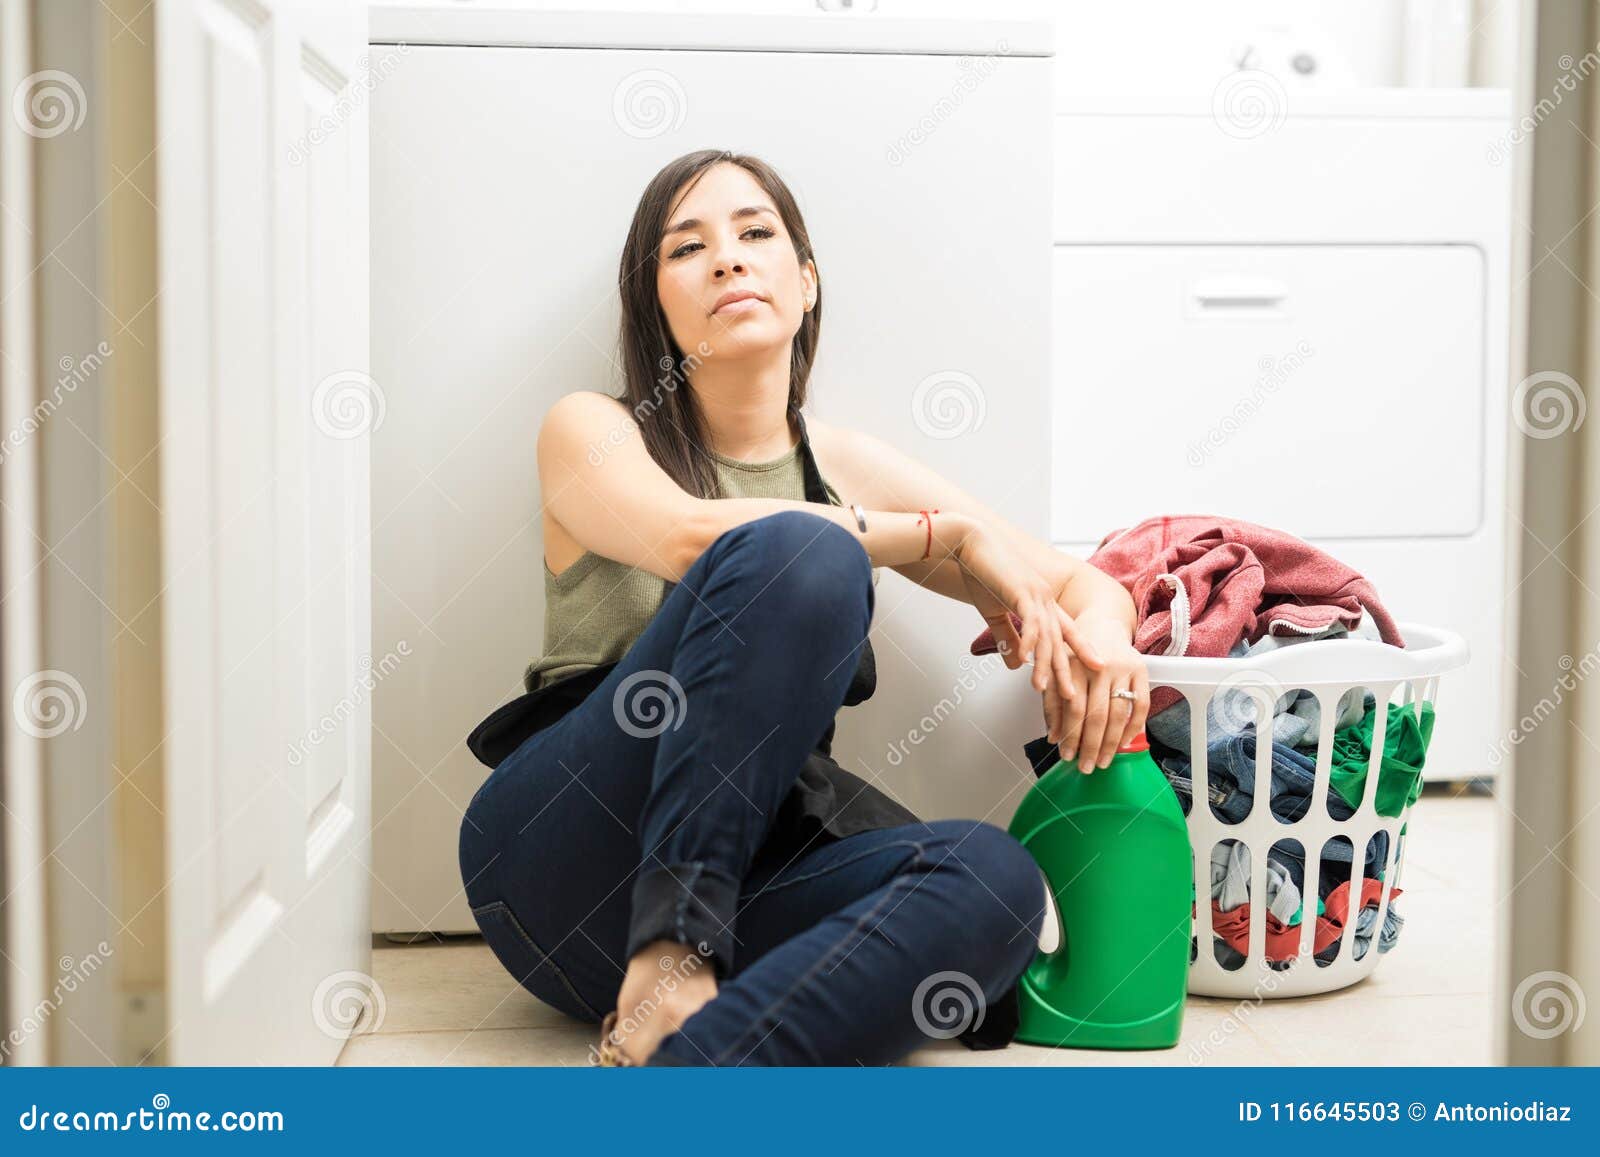 Bored Young Woman Sitting On Floor In Laundry Room Stock Image